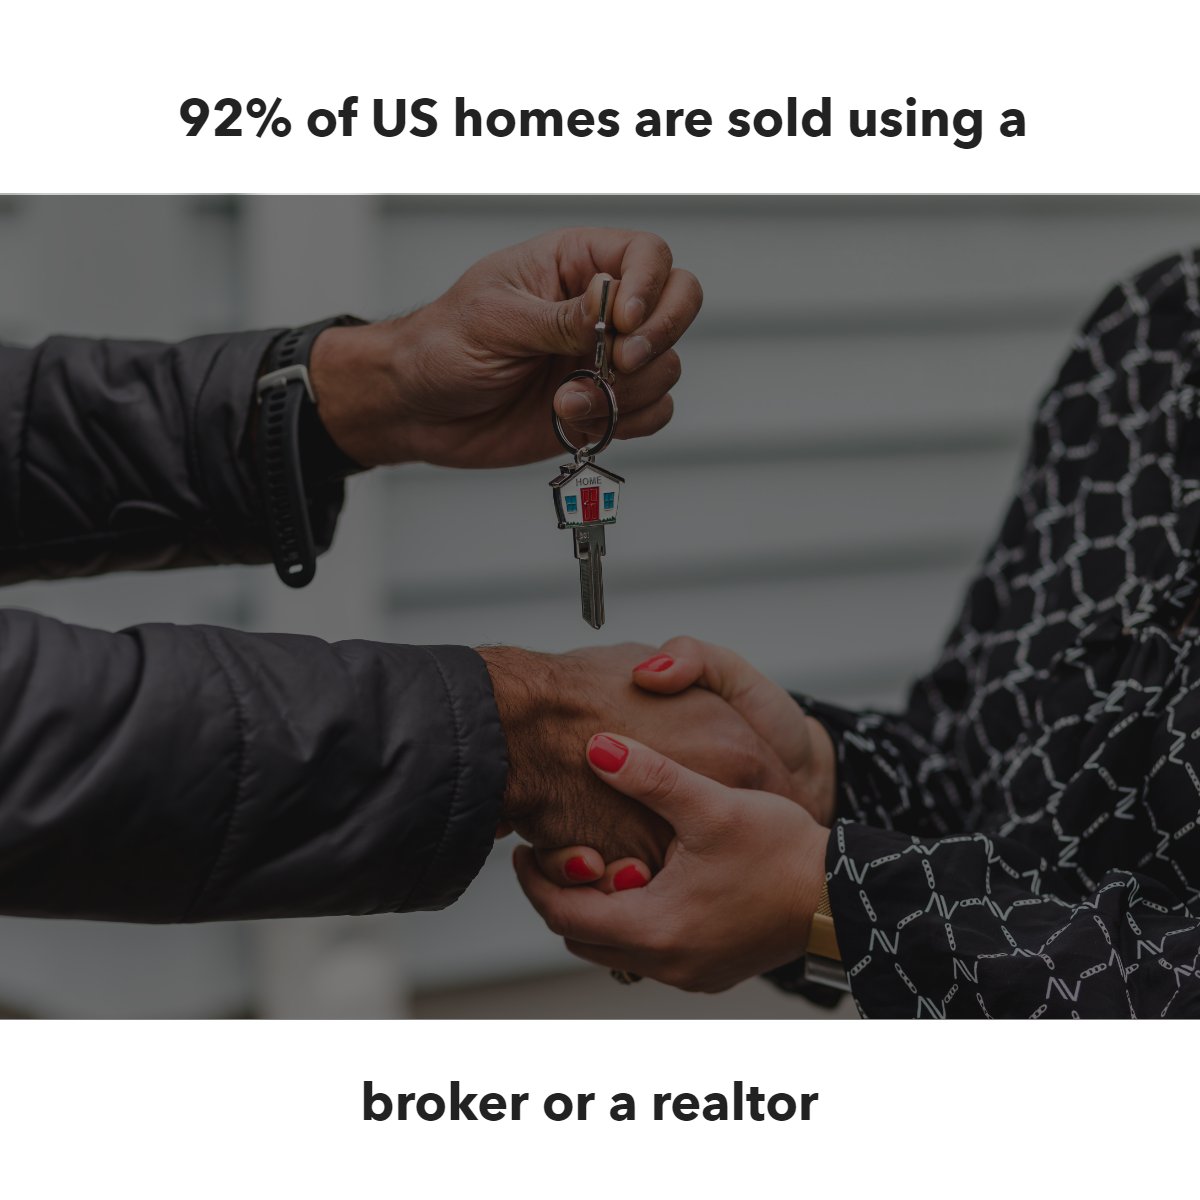 Have you ever worked with a realtor? 🤔

Let us know below!

#didyouknow    #didyouknowfacts    #realtorfacts    #factoftheday    #realestatefact    #realestatefacts
#cherylcitro